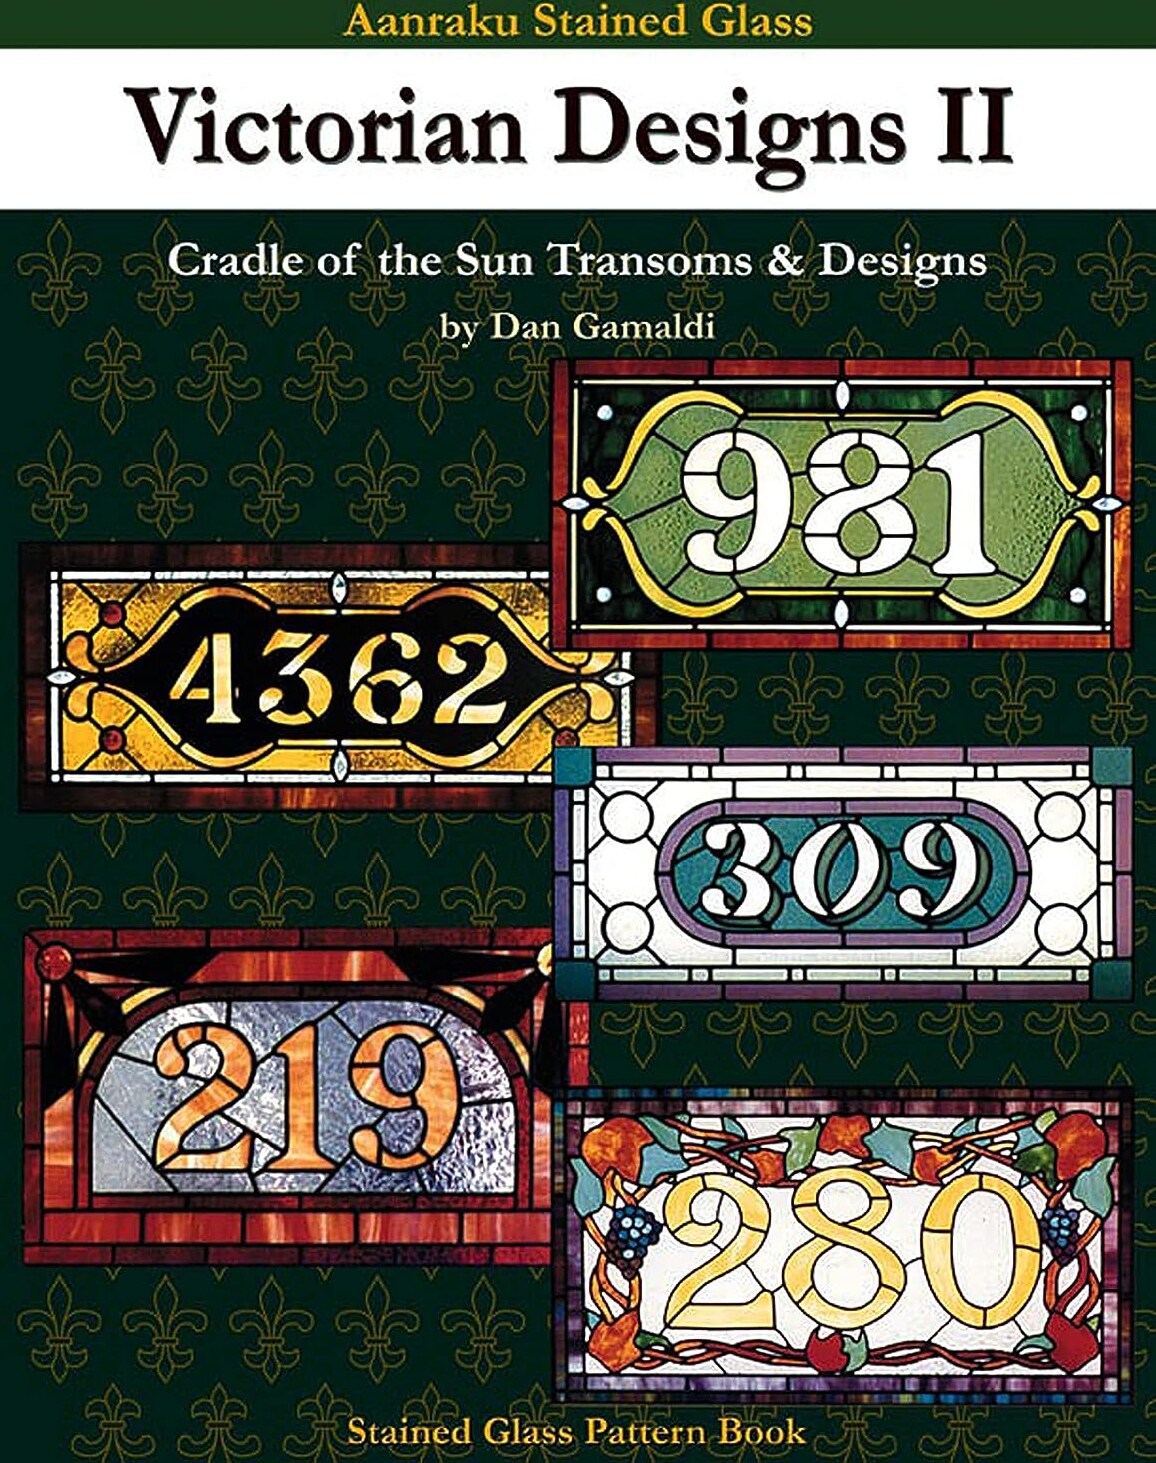 Stained Glass Pattern Book: Victorian Designs II